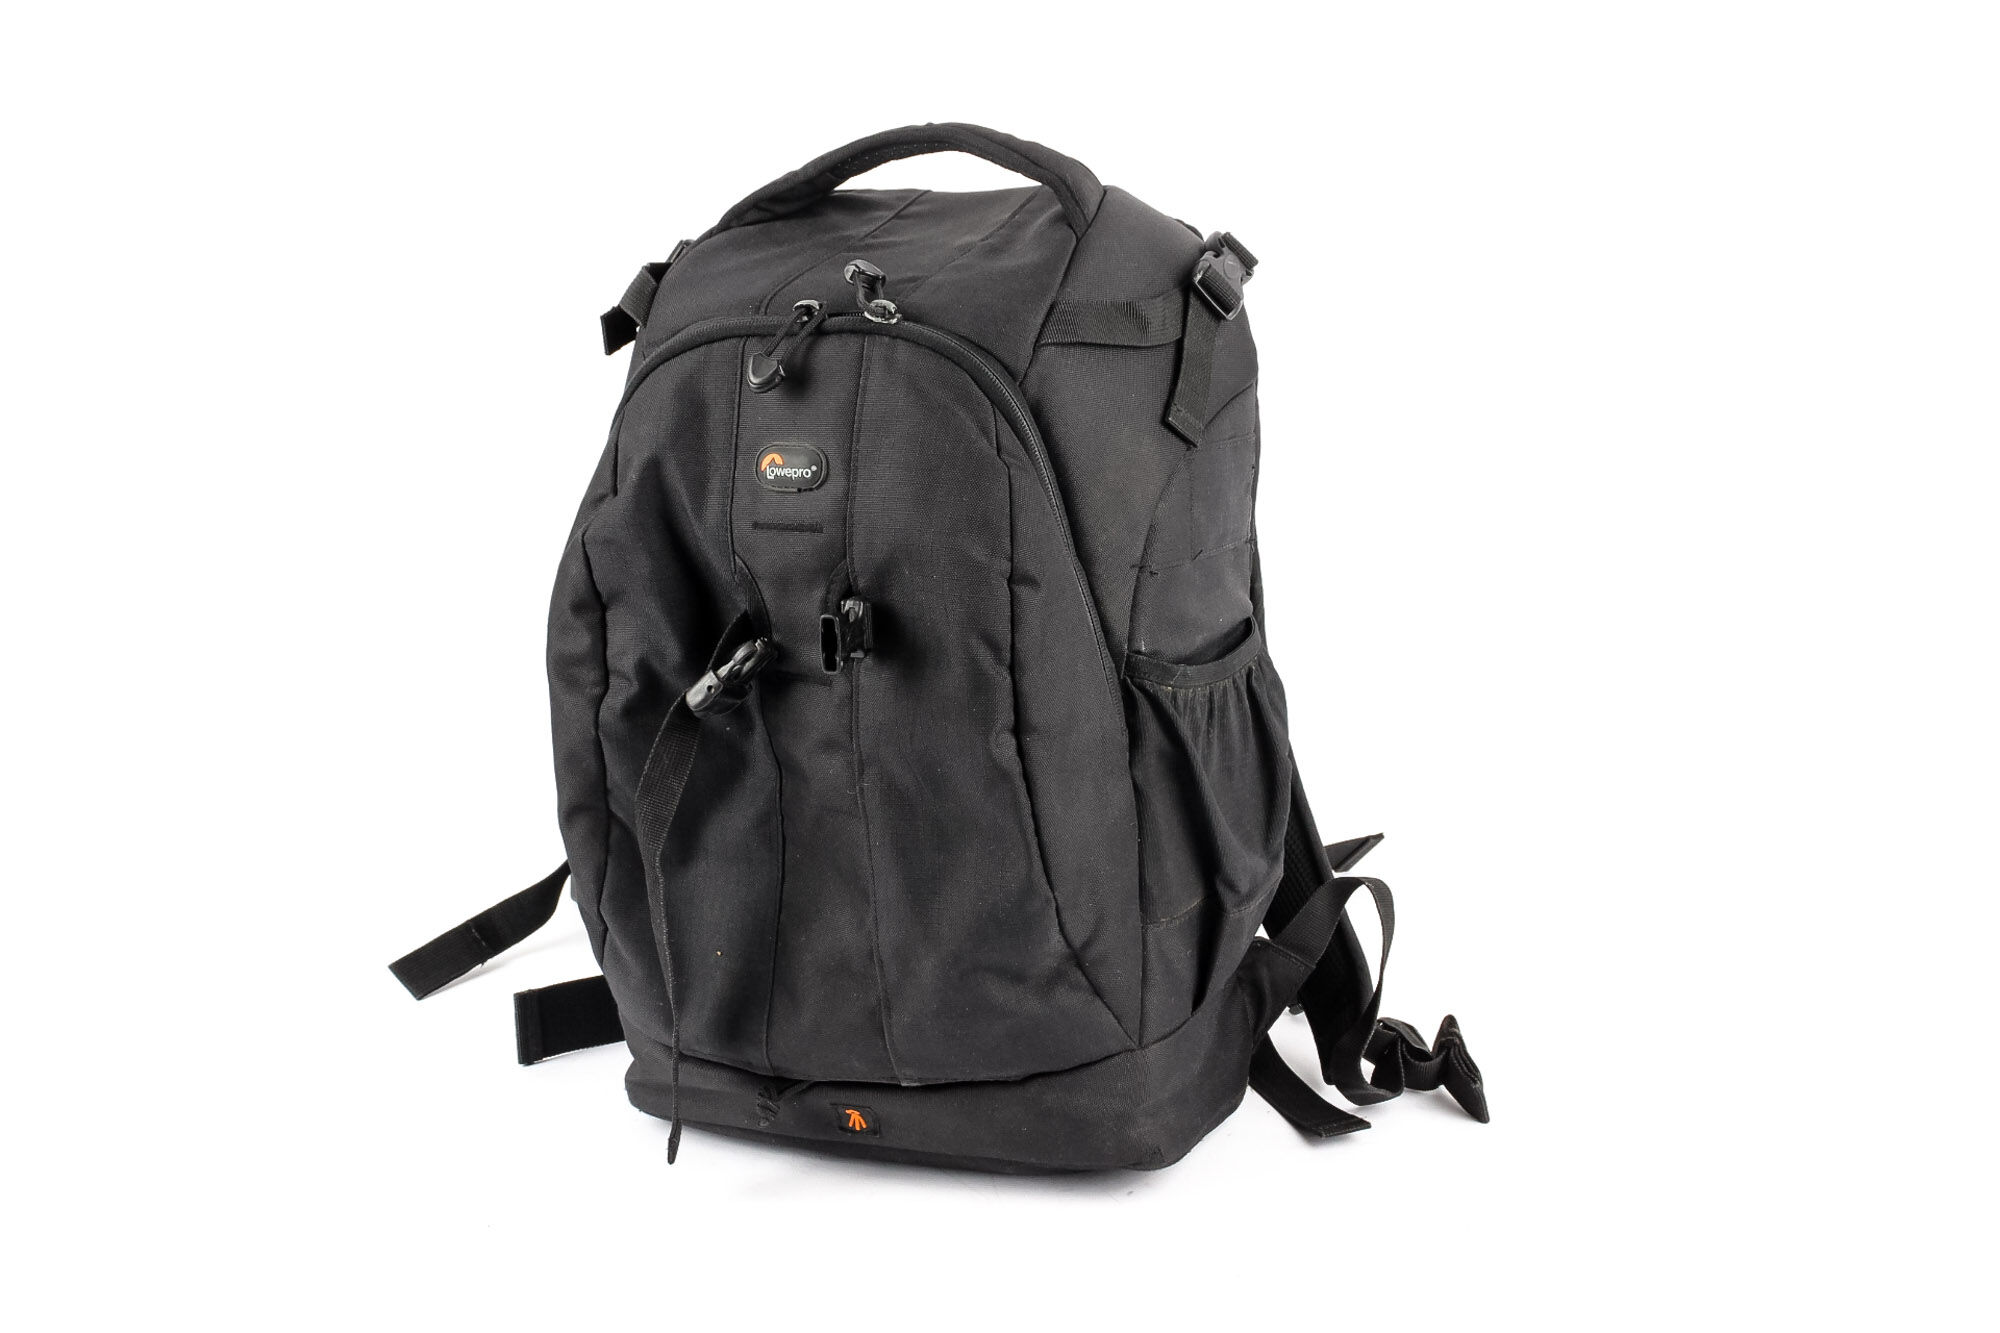 Lowepro Flipside 400 AW Backpack (Condition: Well Used)